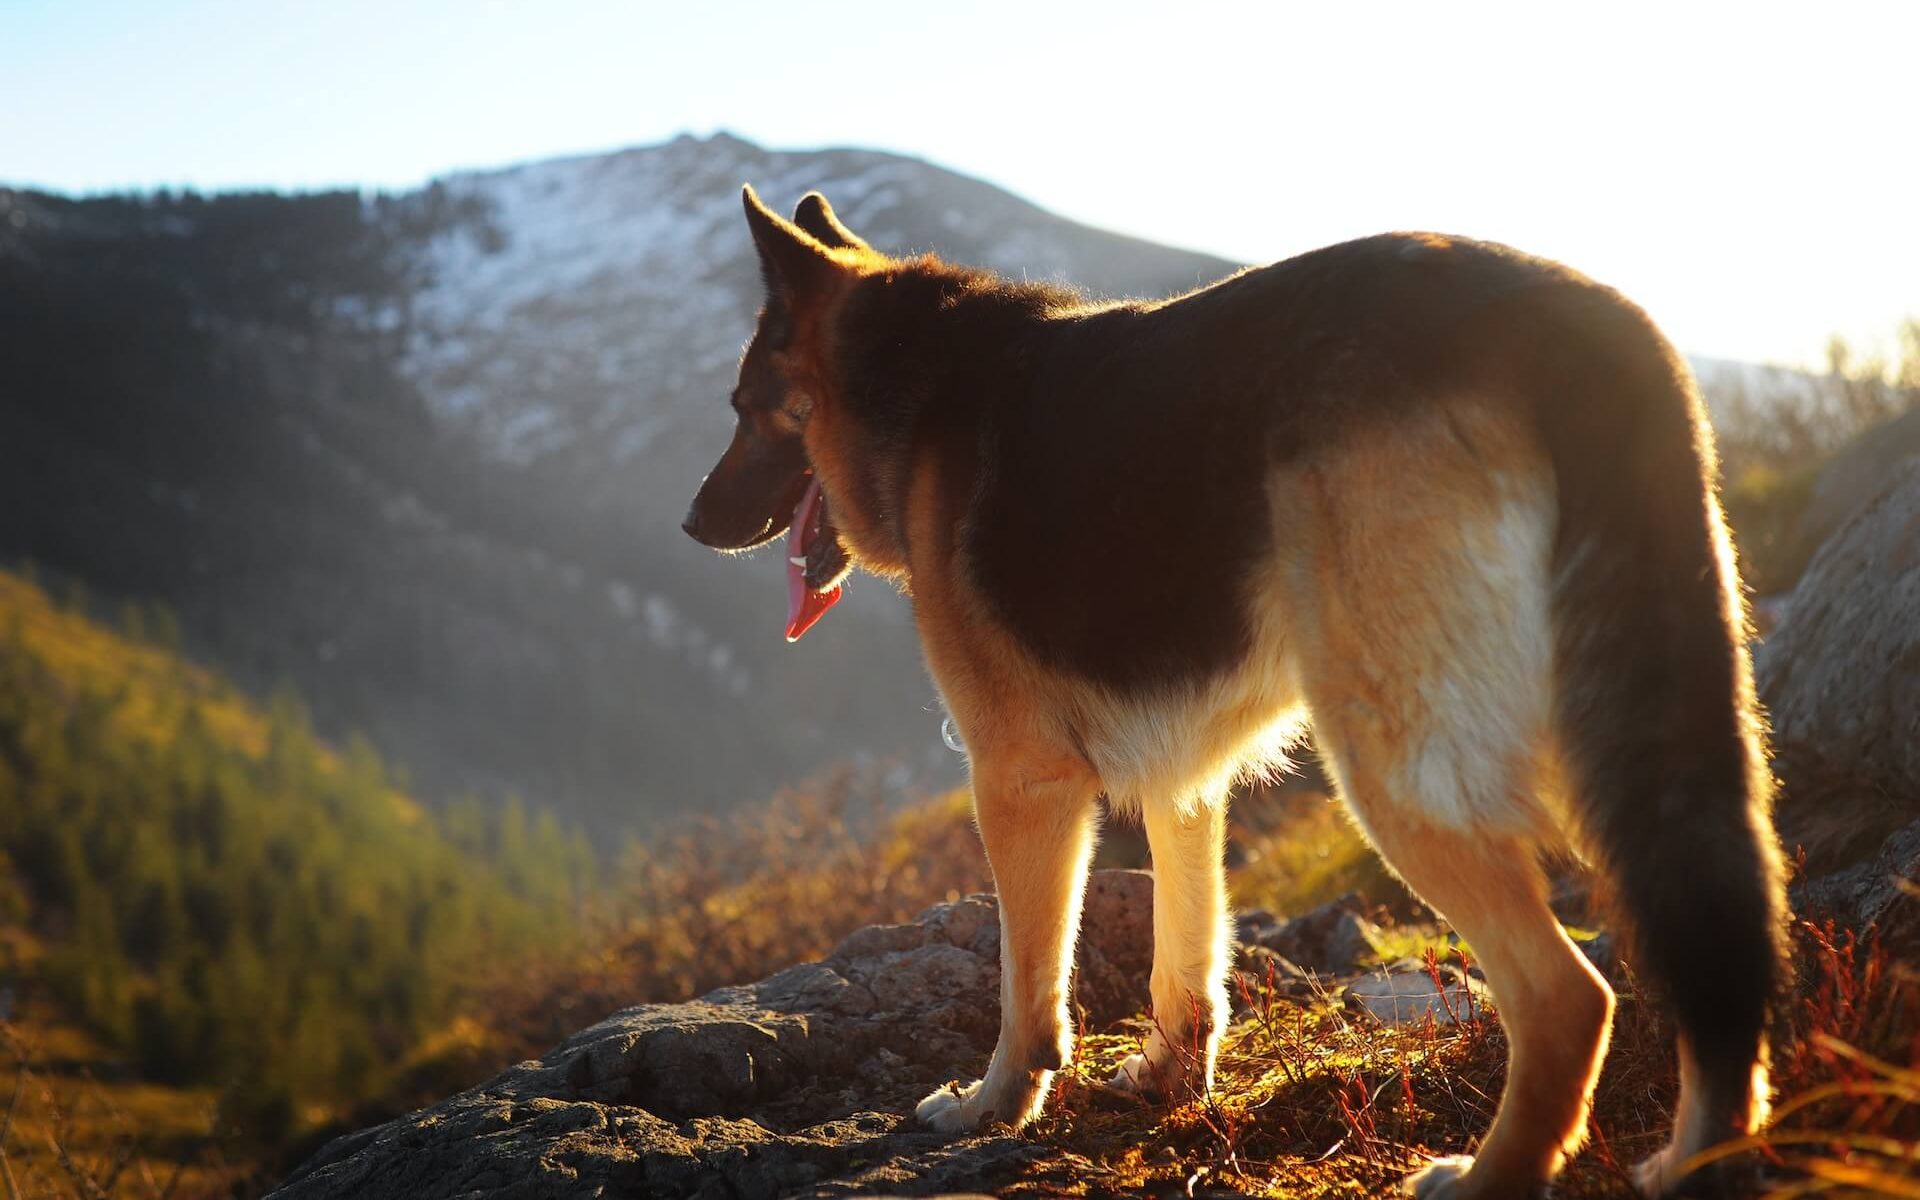 A majestic German Shepherd dog with a proud stance.